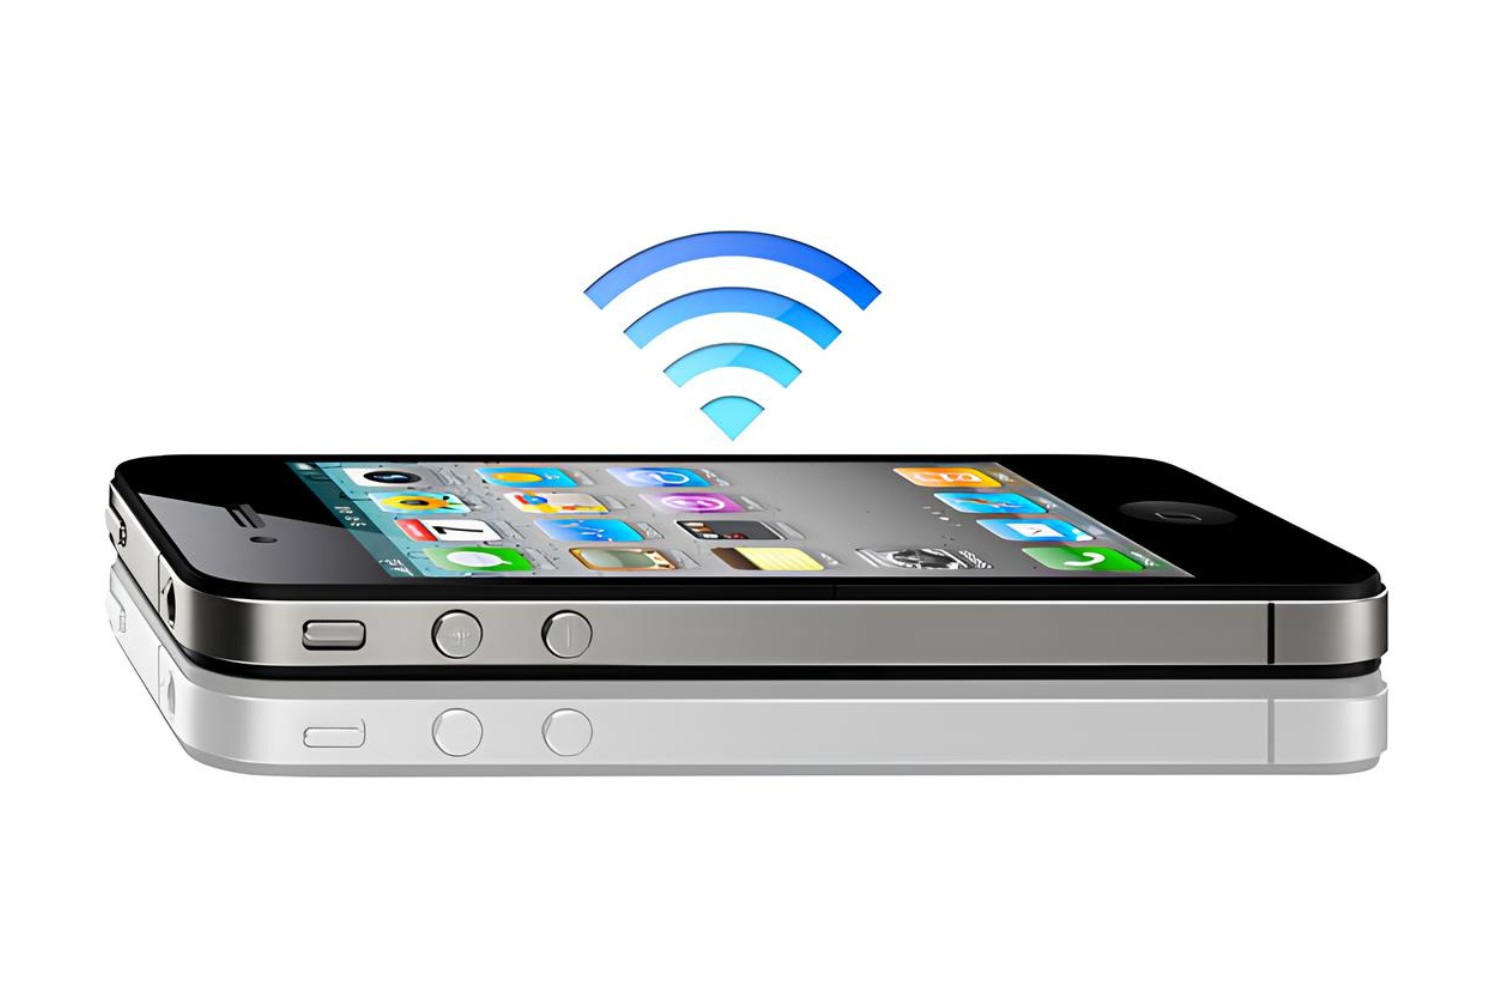 Creating Wi-Fi Hotspot With IPhone 4S: User-Friendly Guide